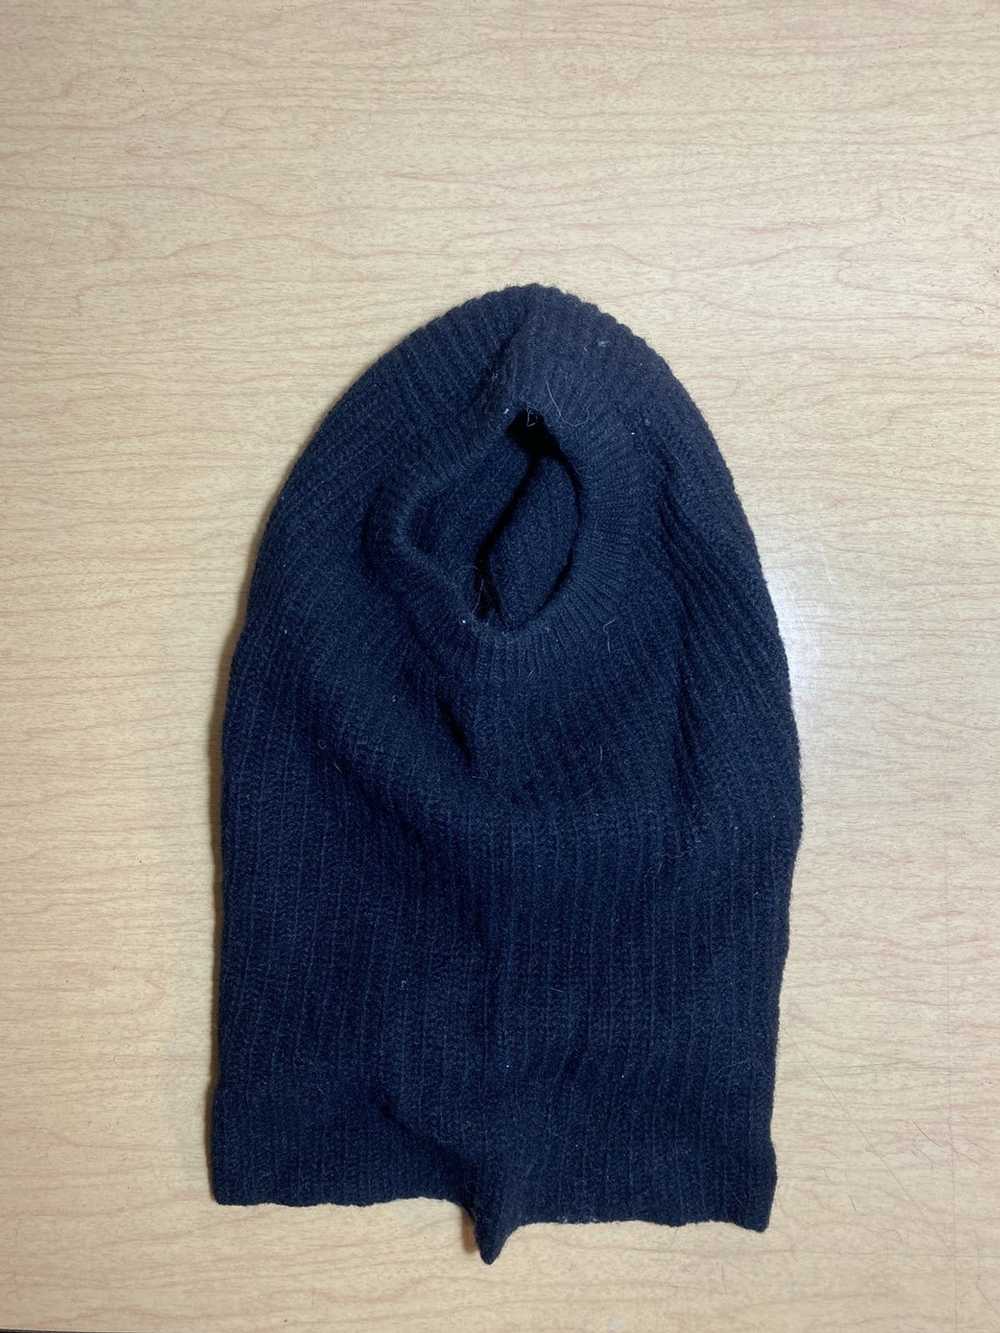 First Aid To The Injured WOOL KNIT BALACLAVA - image 3